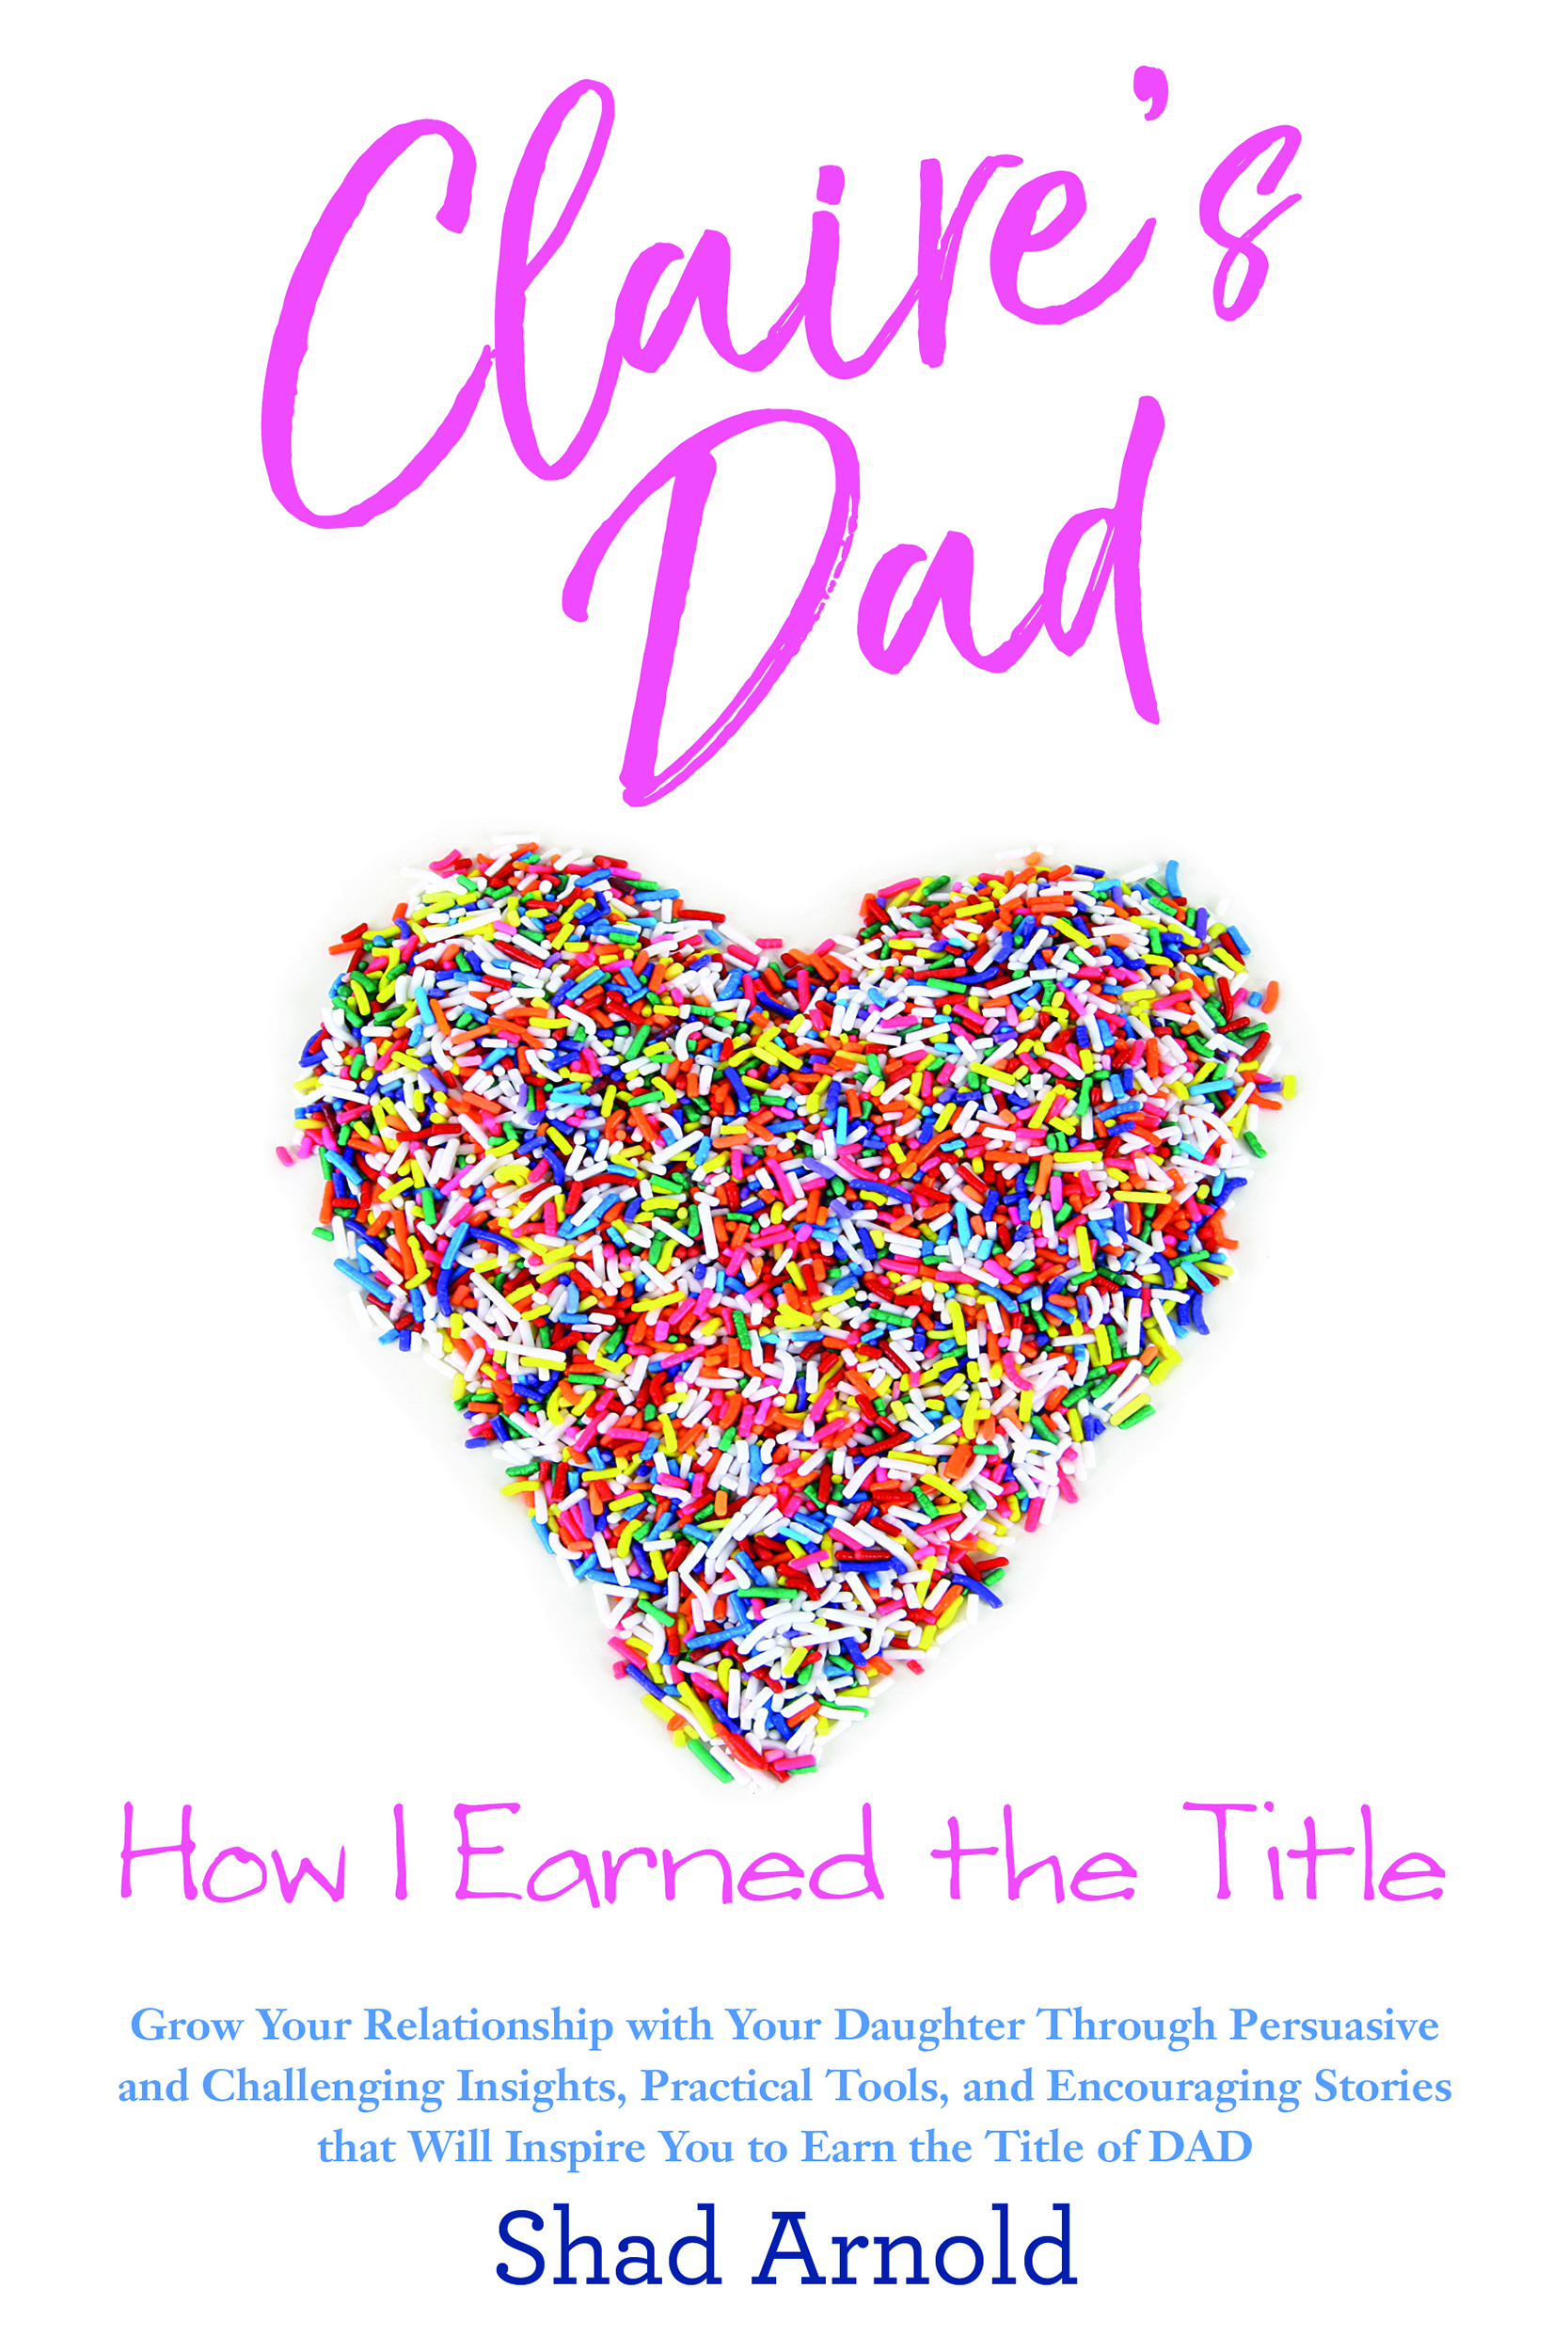 Claire's Dad: How I Earned the Title (Grow Your Relationship with Your Daughter Through Persuasive and Challenging Insights, Practical Tools, and Encouraging Stories that Will Inspire You to Earn the Title of Dad)